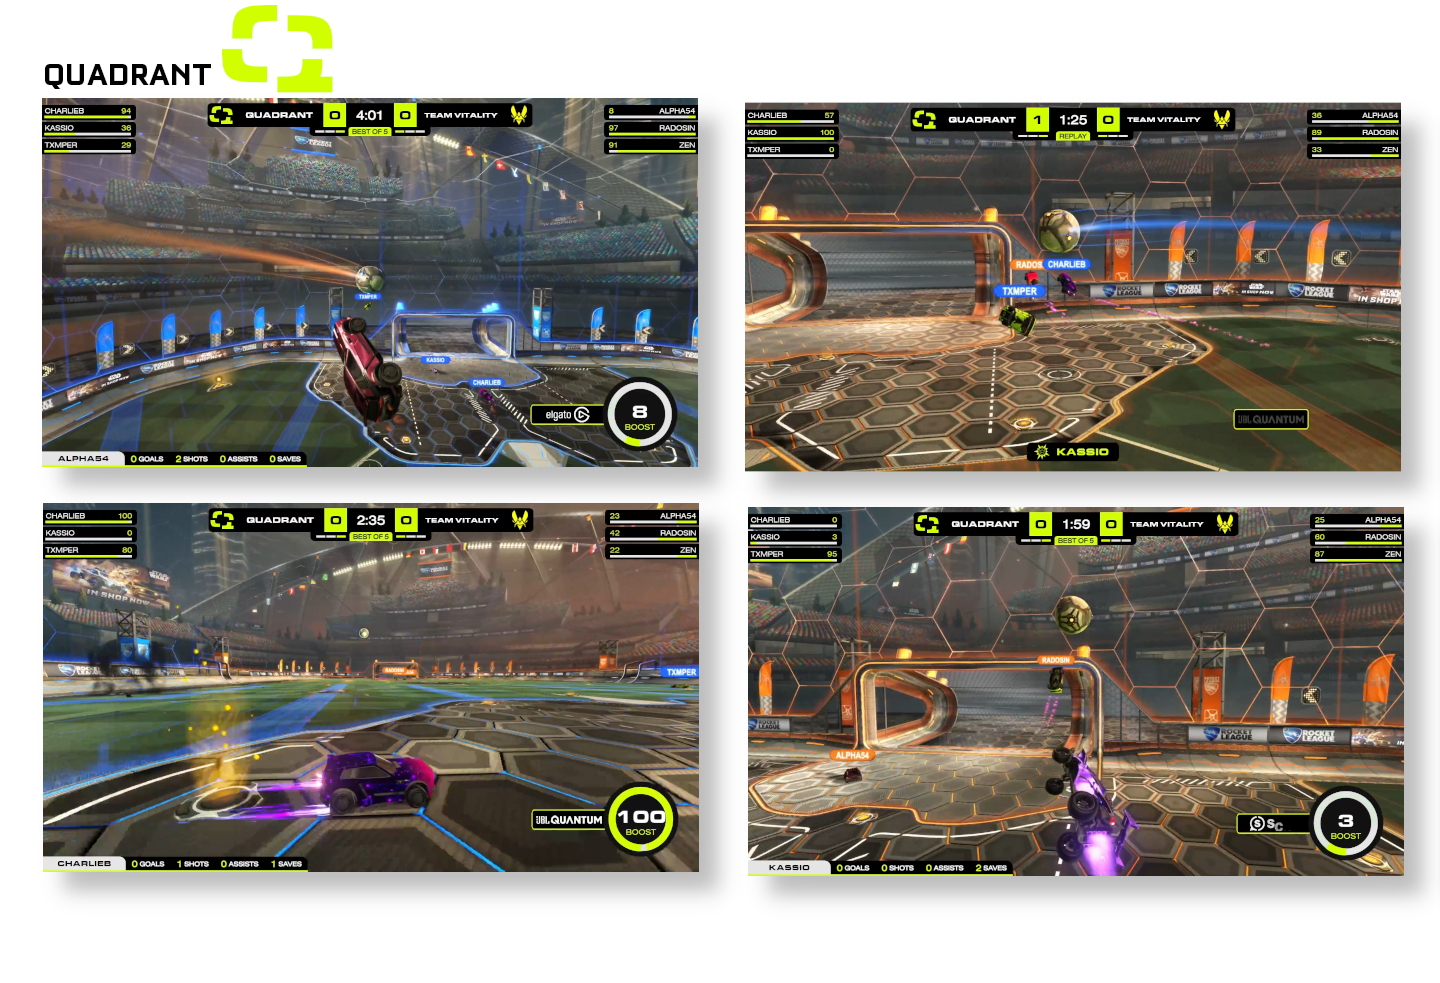 Tournament Overlay for Rocket League